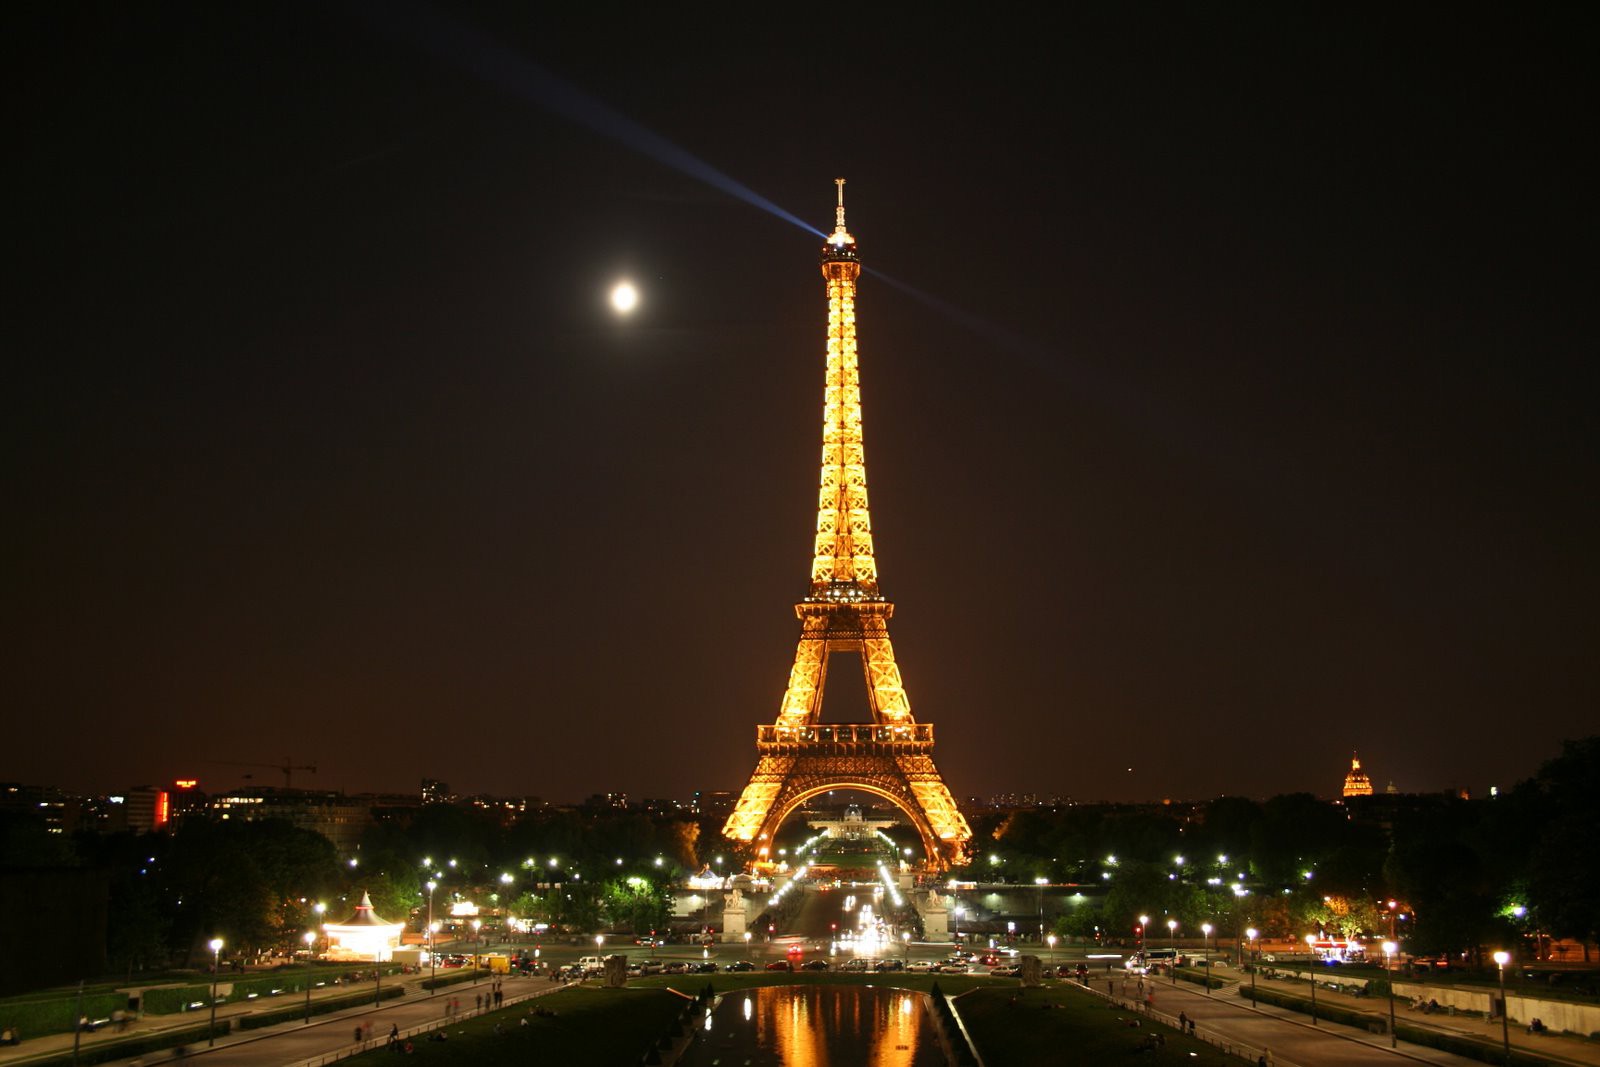 Free Download Eiffel Tower France Wallpaper Hd 1600x1067 For Your Desktop Mobile Tablet Explore 45 Wallpaper Of Eiffel Tower Paris Wallpaper For Walls Paris At Night Wallpaper Wallpaper Paris